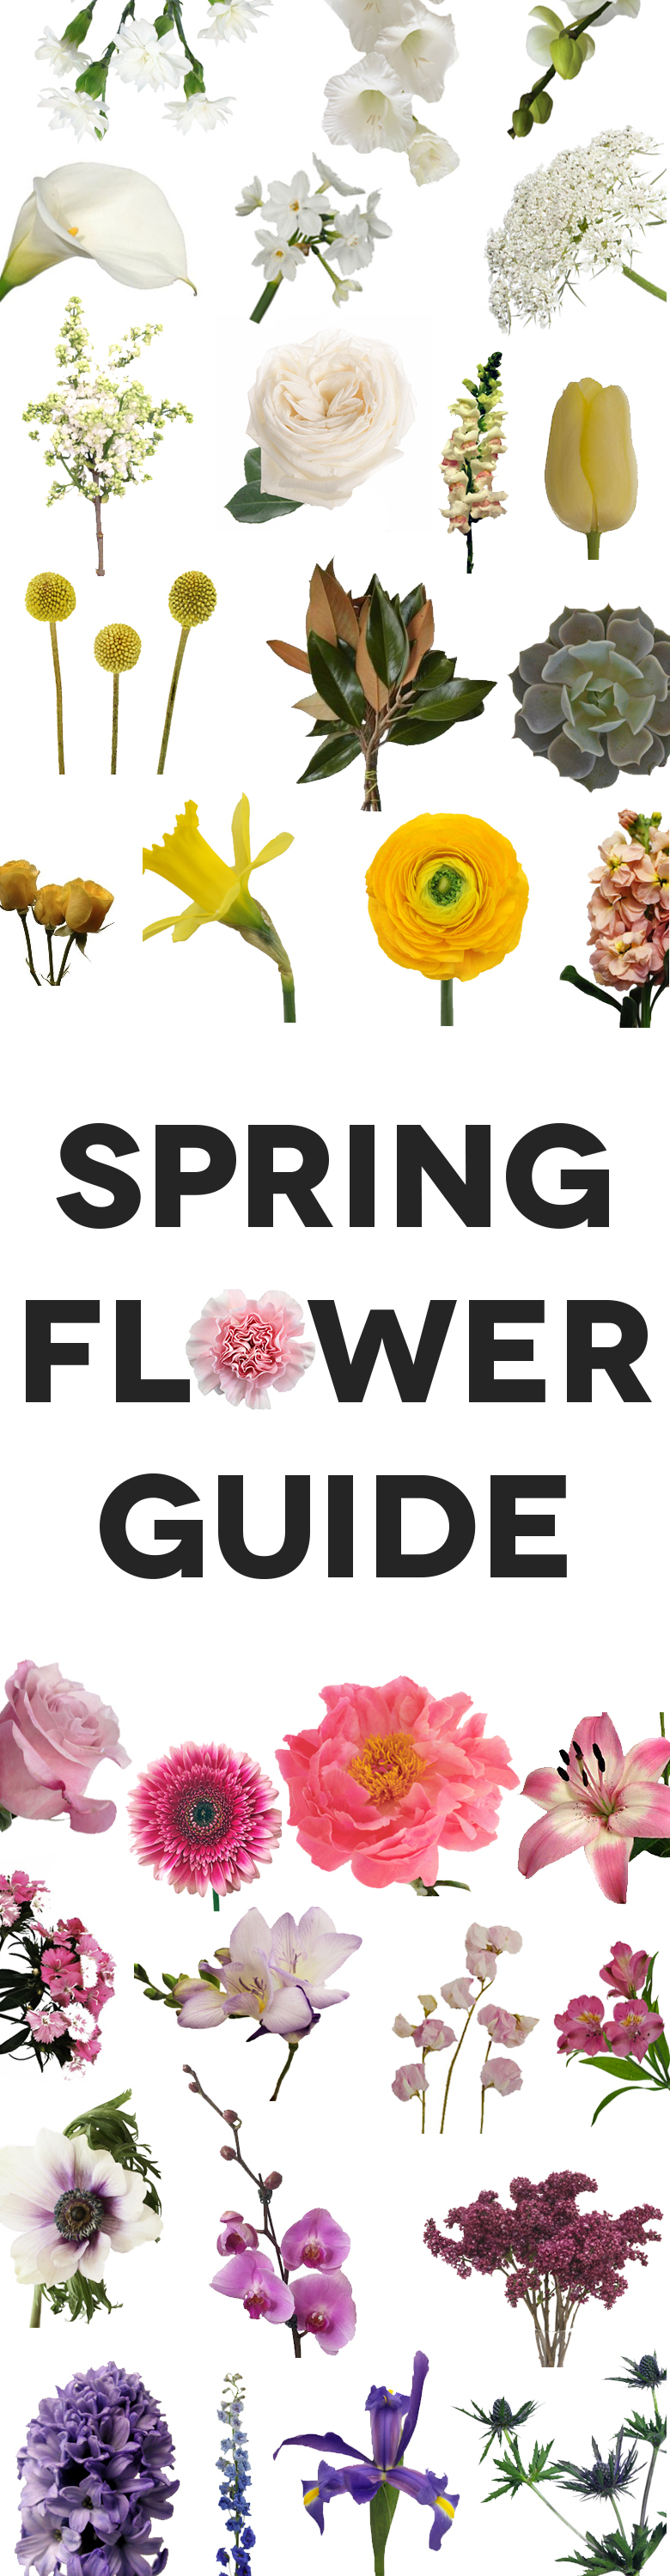 Spring Flowers Guide graphic full of various spring flowers